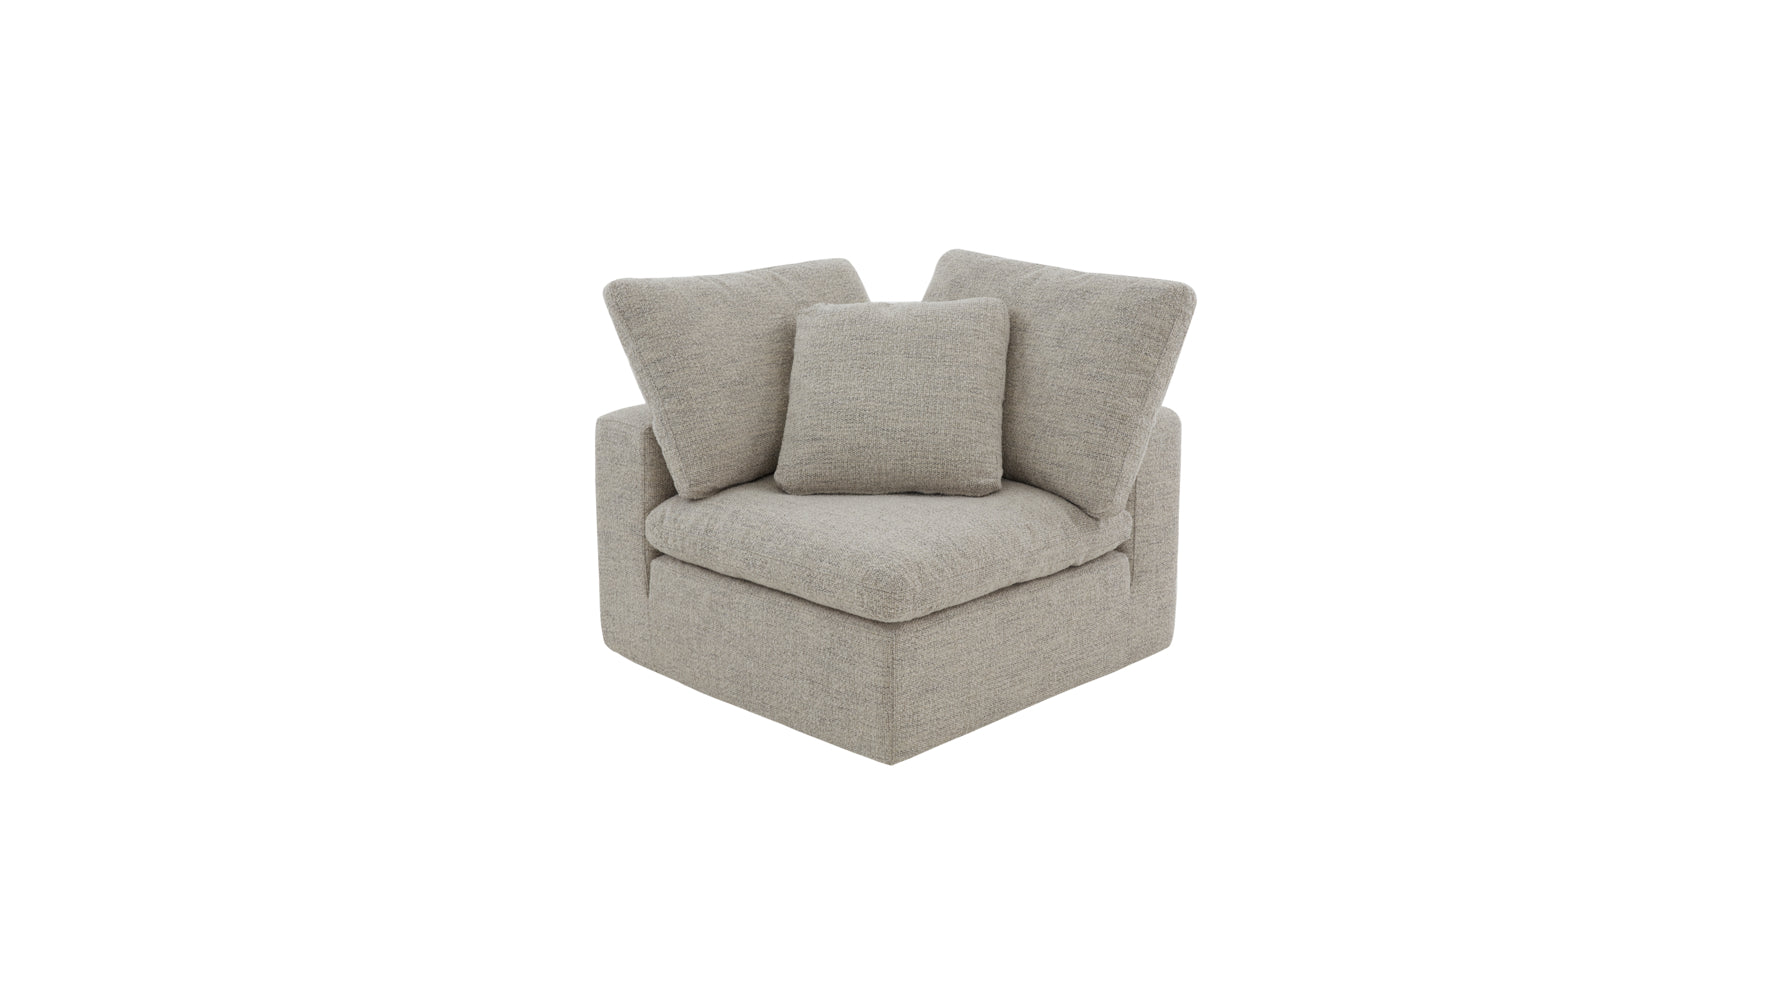 Movie Night™ Corner Chair, Large, Oatmeal (Left Or Right) - Image 2